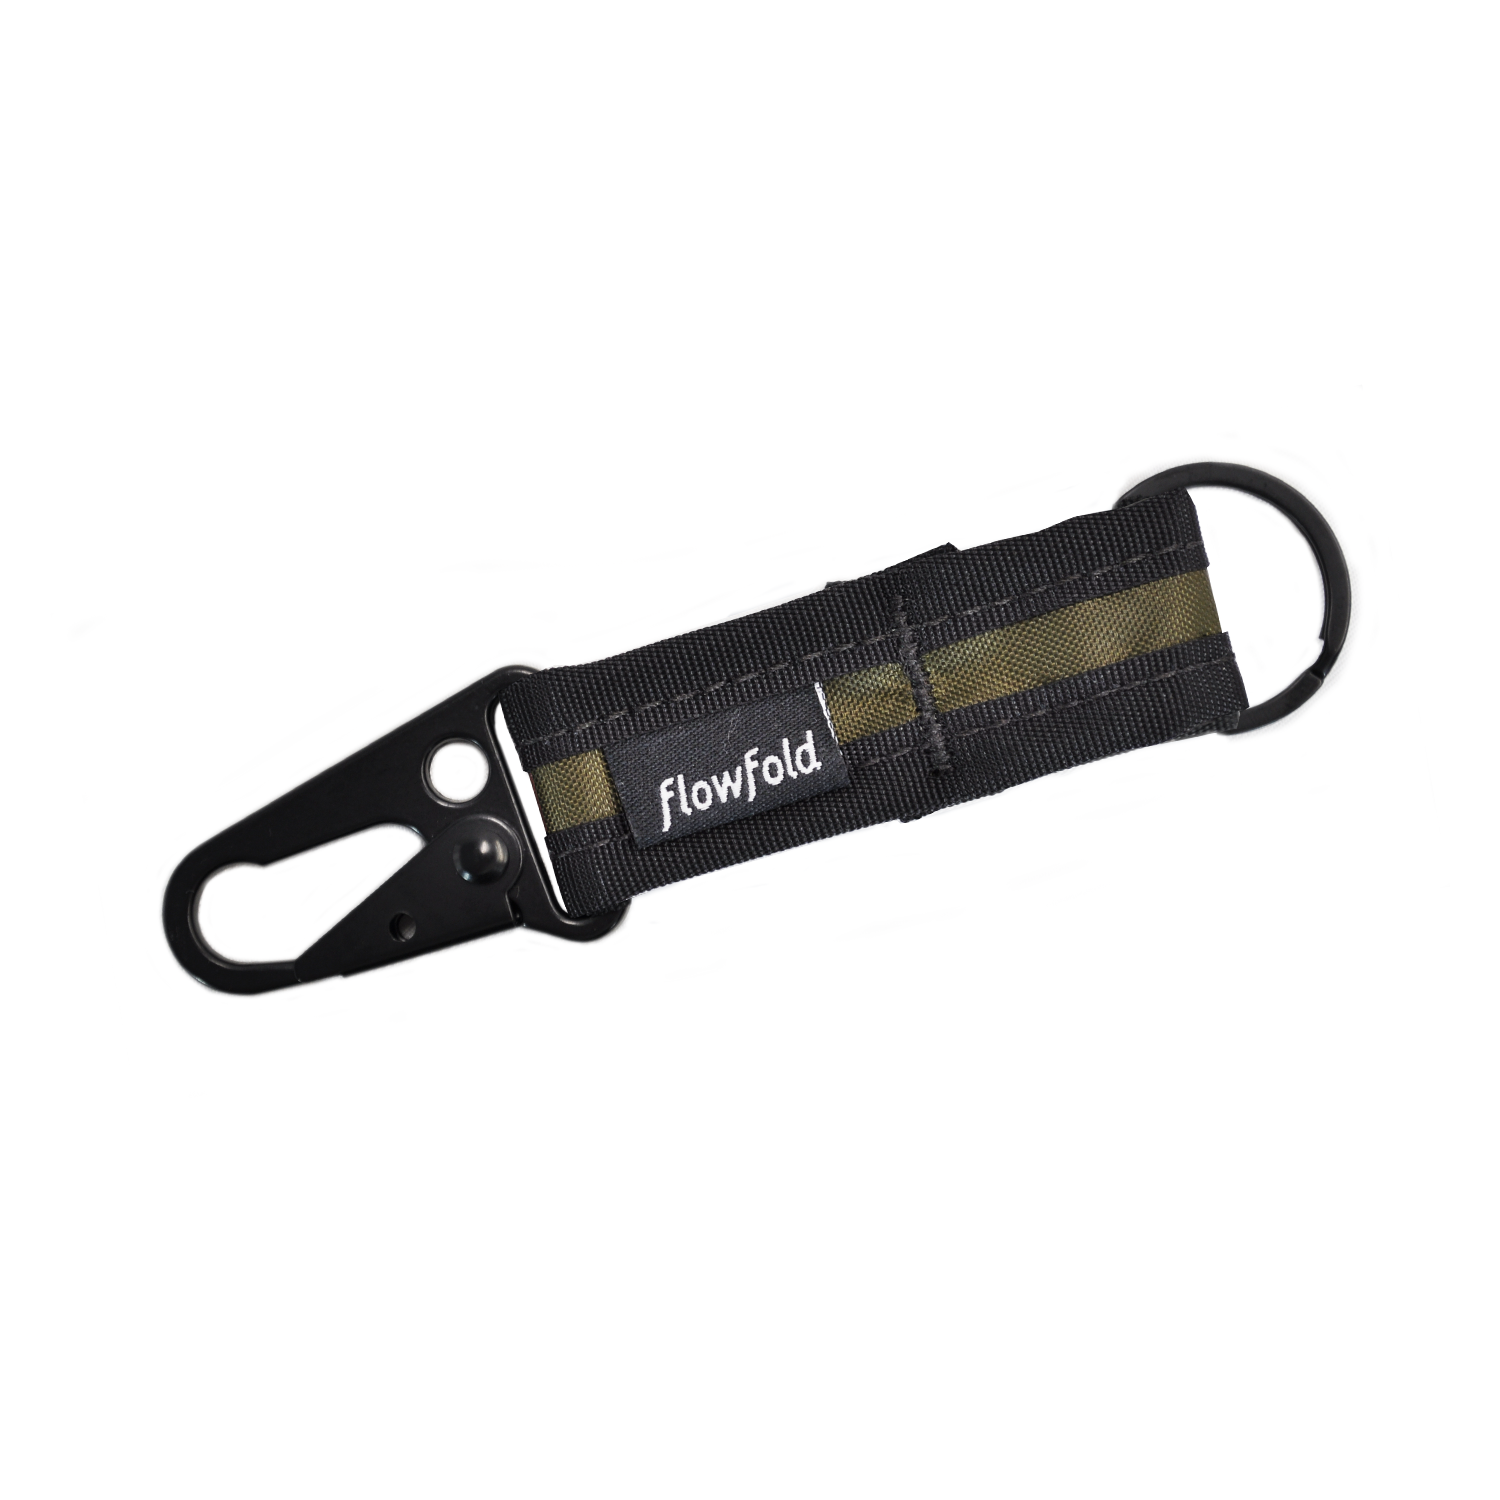 Black Snap Hook Keychain made from water resistant EcoPak